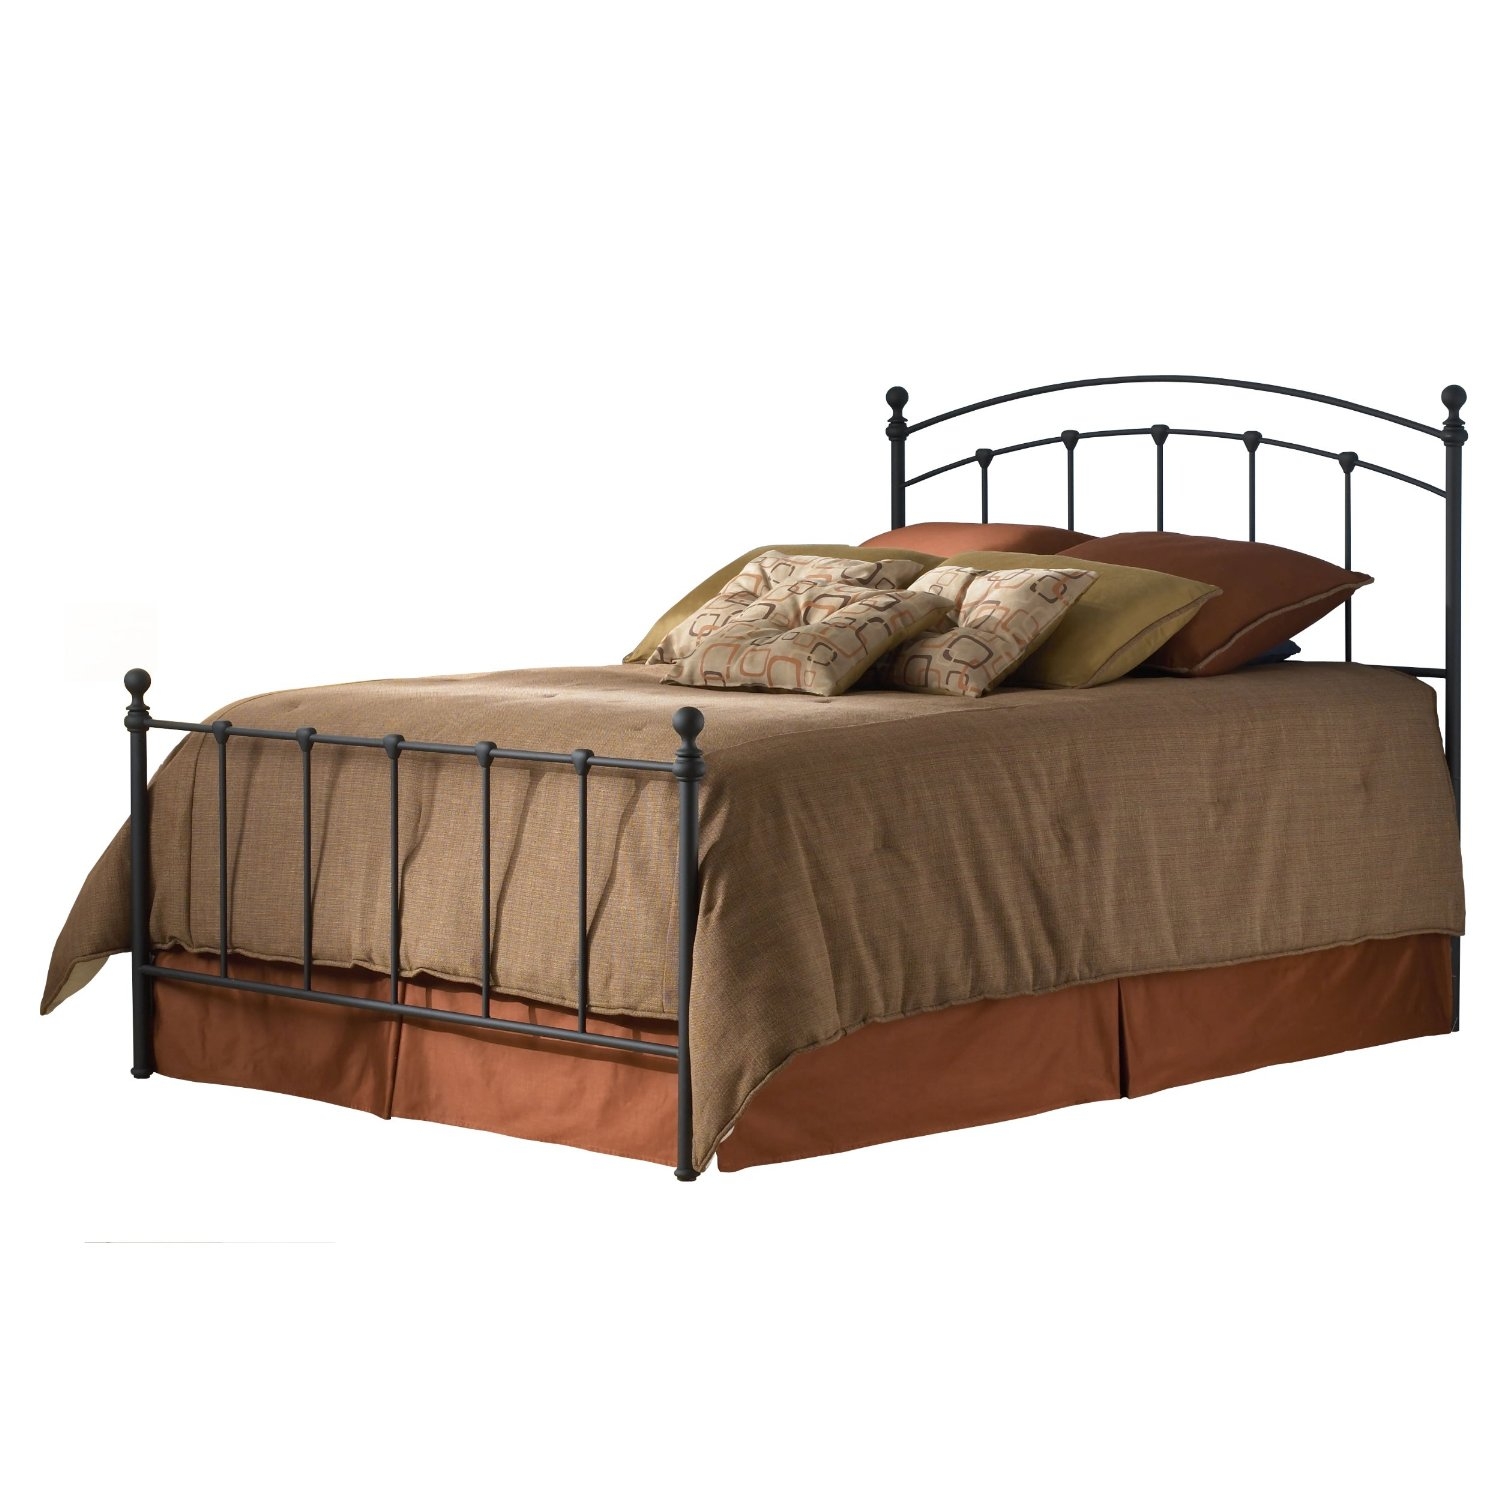 Queen size Metal Bed with Headboard and Footboard in Matte Black